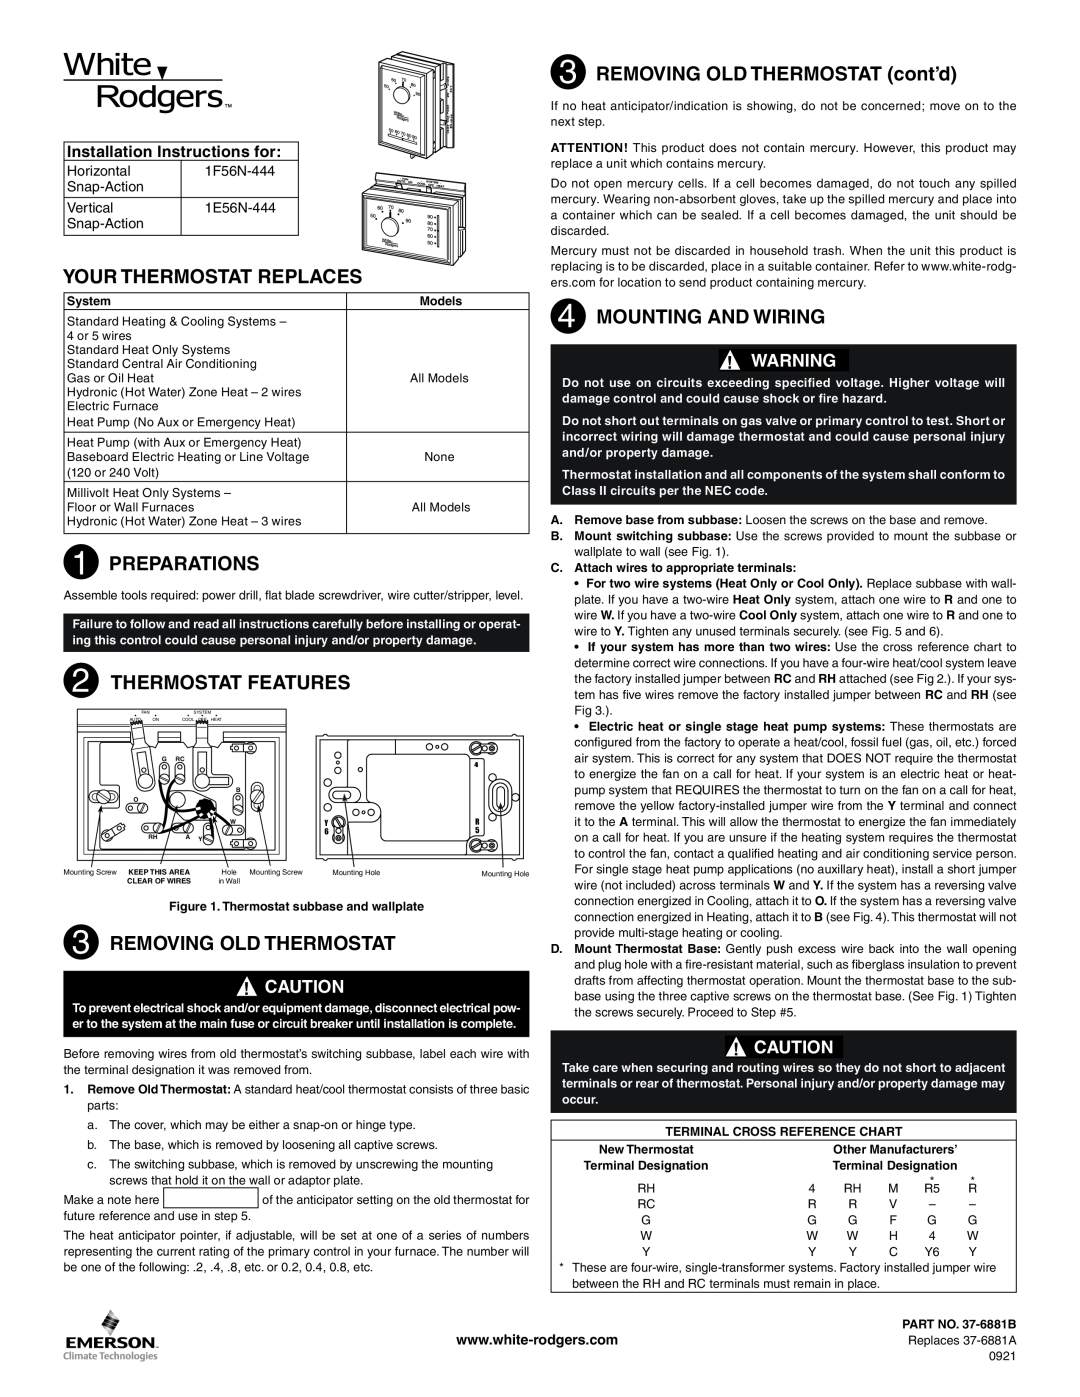 White Rodgers 1E56N-444 installation instructions Your Thermostat Replaces, REMOVING OLD THERMOSTAT cont’d, Preparations 